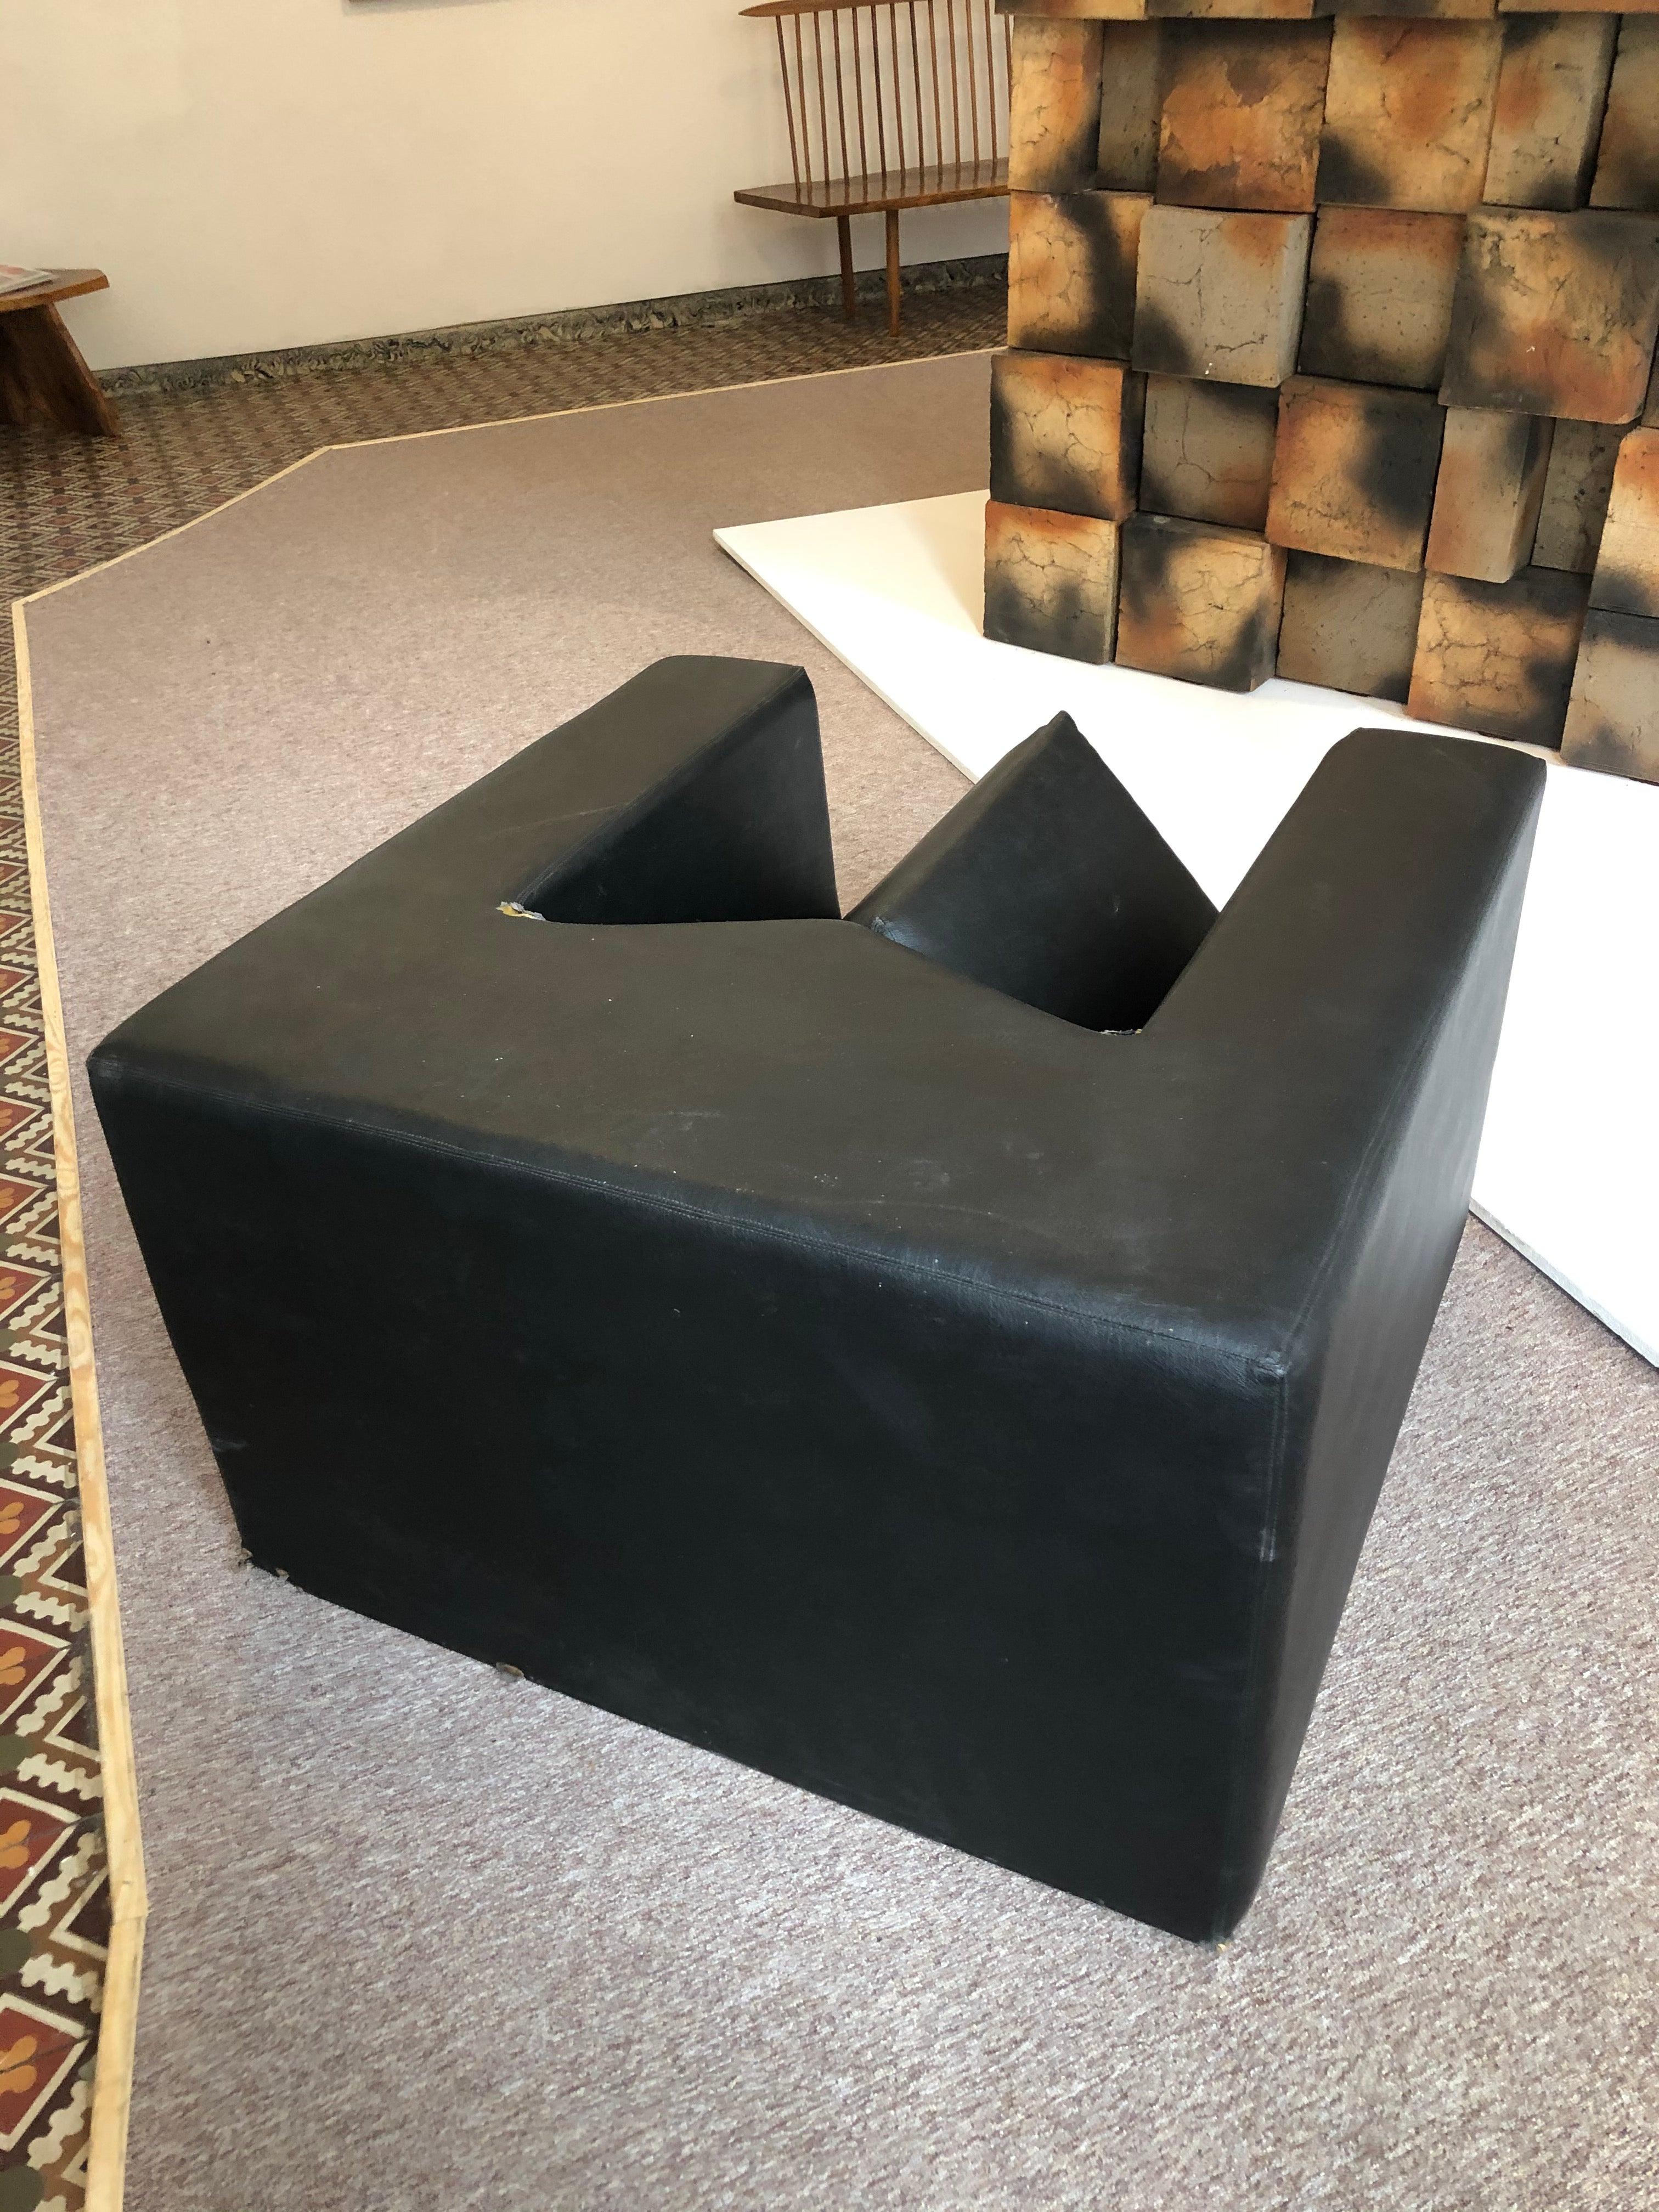 “Sculpture” armchair, 1969 polyurethane foam covered with black vinyl signed at the base H 58 cm, W 95 cm, D 94 cm This work is registered in the archives of Madame Denyse Durand-Ruel under n ° 5897 this armchair was produced in 3 copies, only two